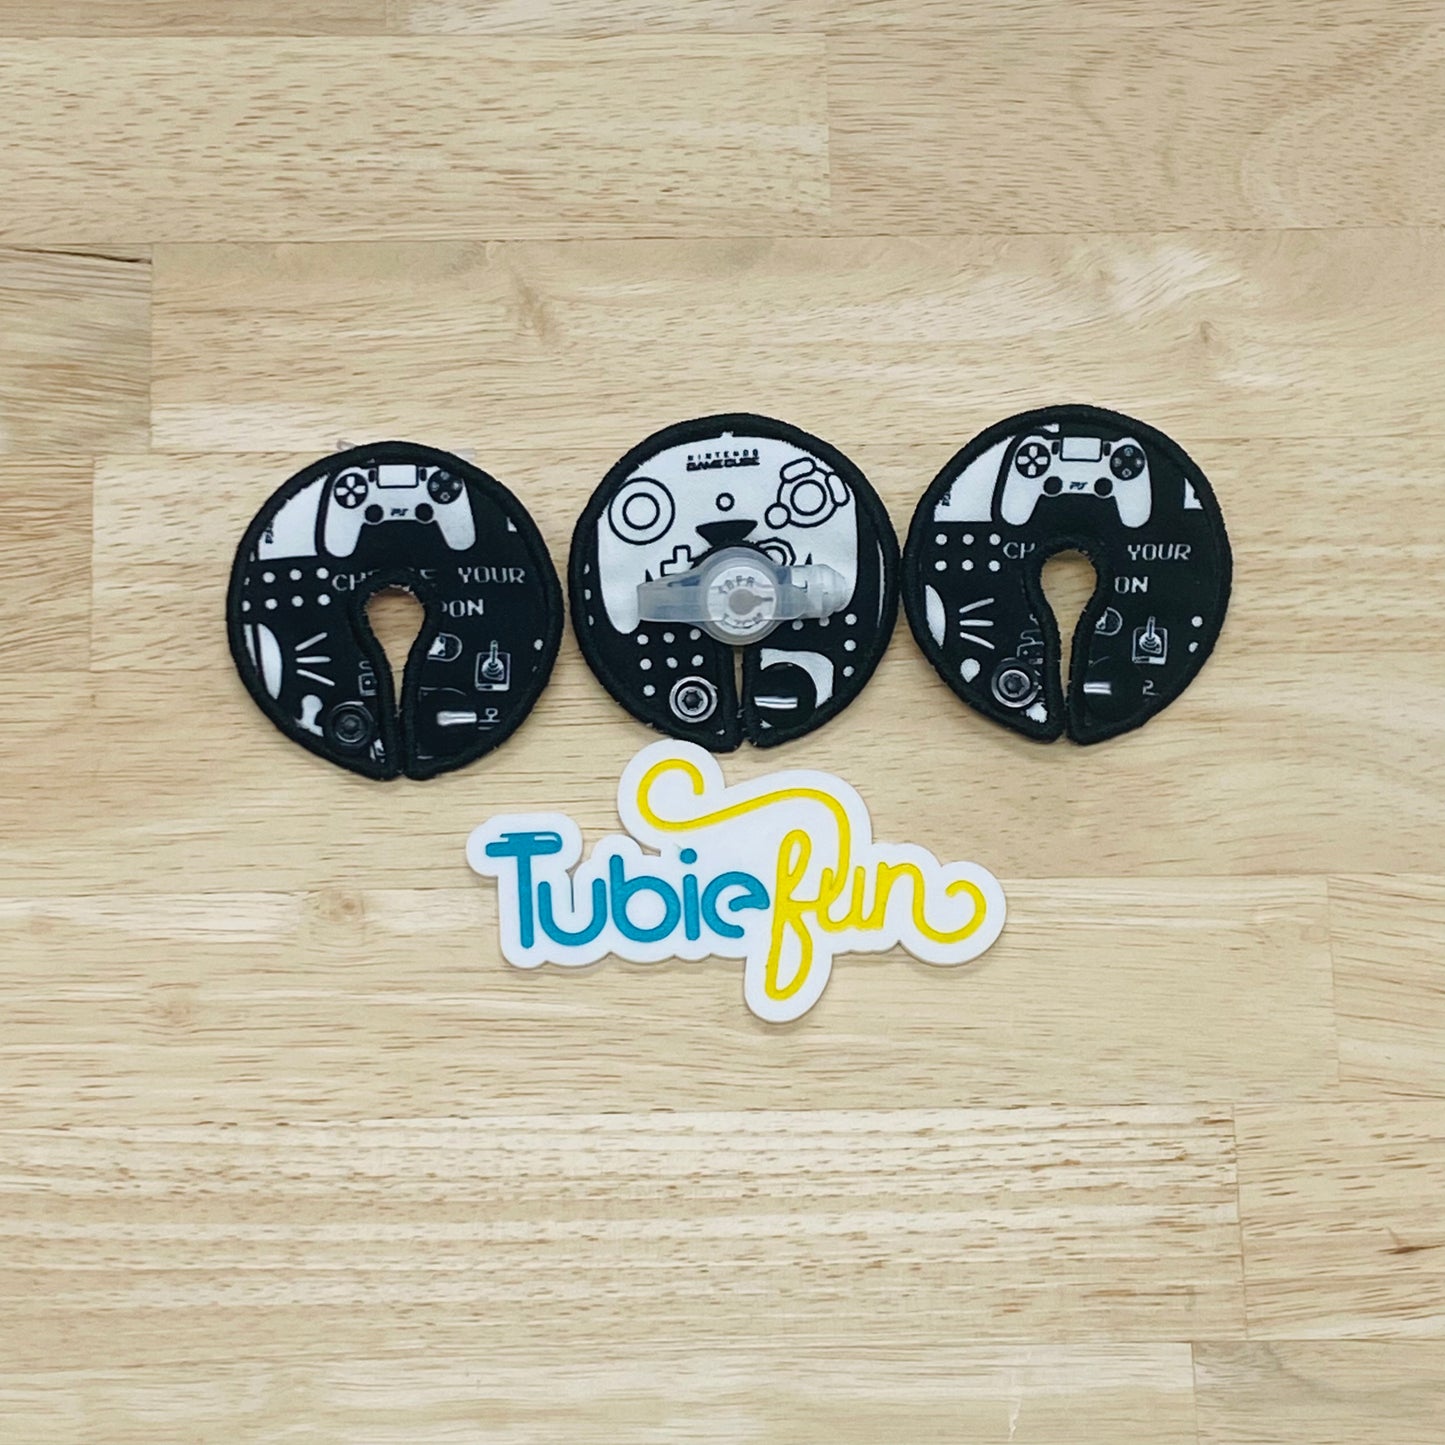 G-Tube Button Pad Cover - Game Control